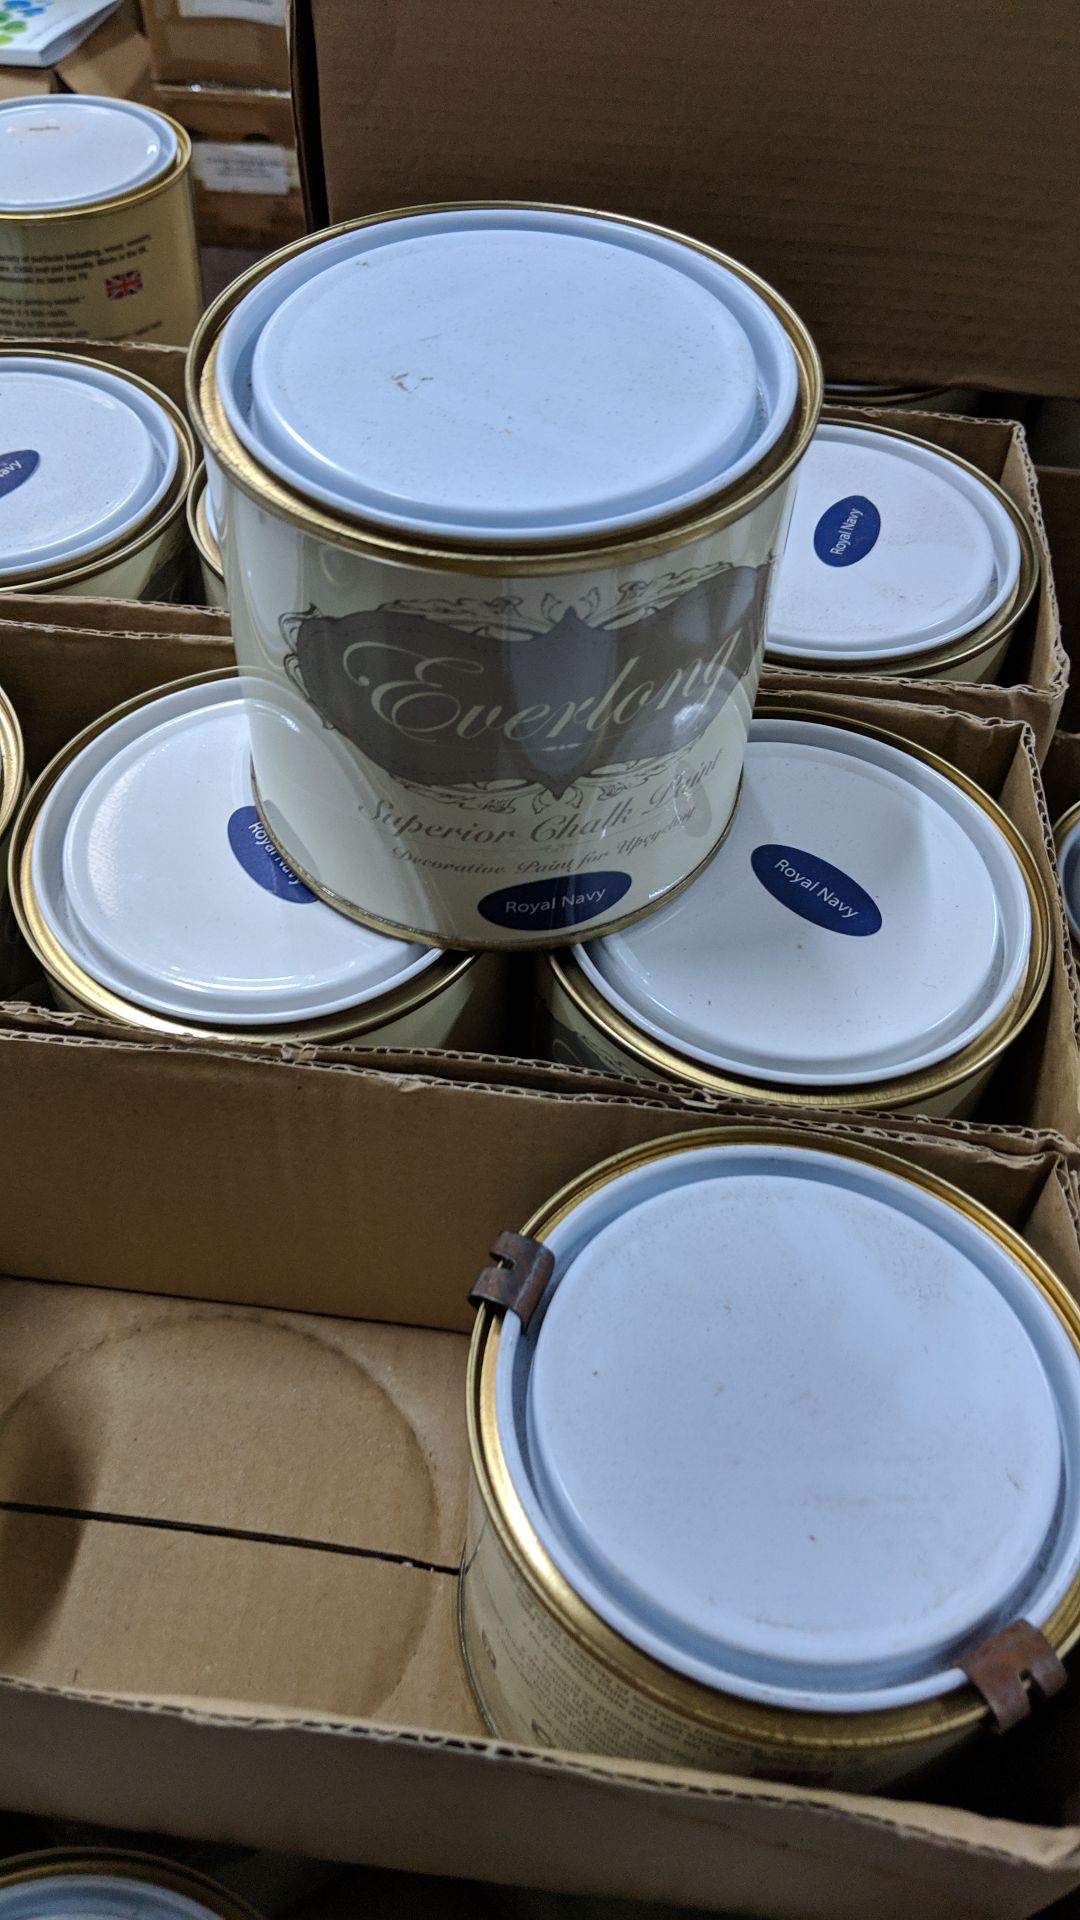 69 off 500ml tins of Everlong branded superior chalk paint - colour Royal Navy This lot is one of - Image 2 of 2